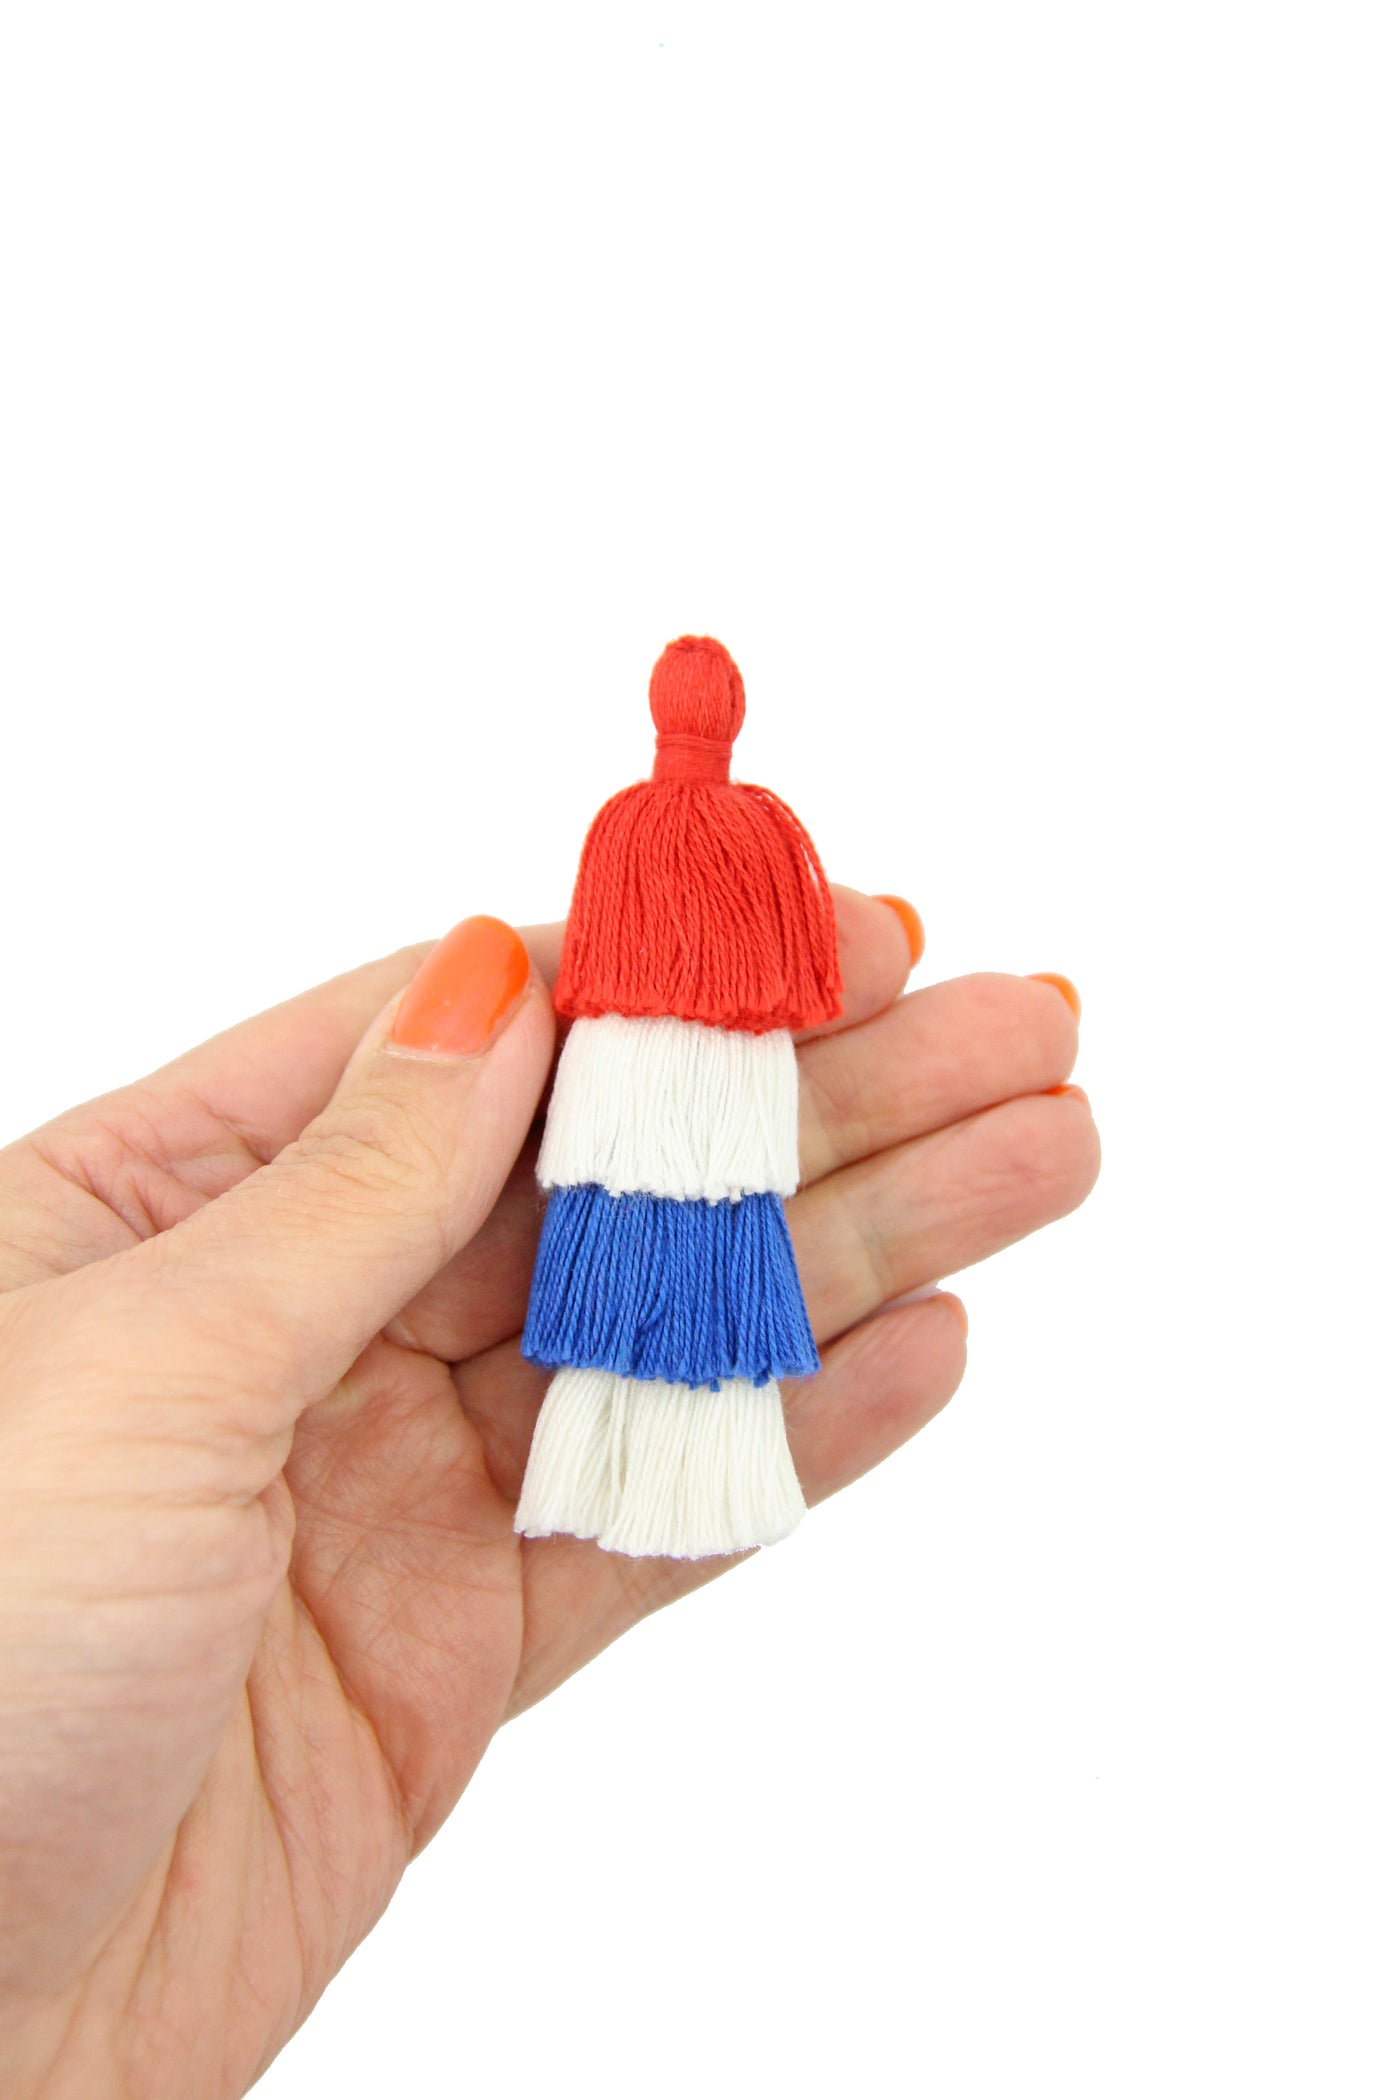 Tiered Tassel, 3" Cotton Fringe Pendant for Jewelry Making, 1 piece